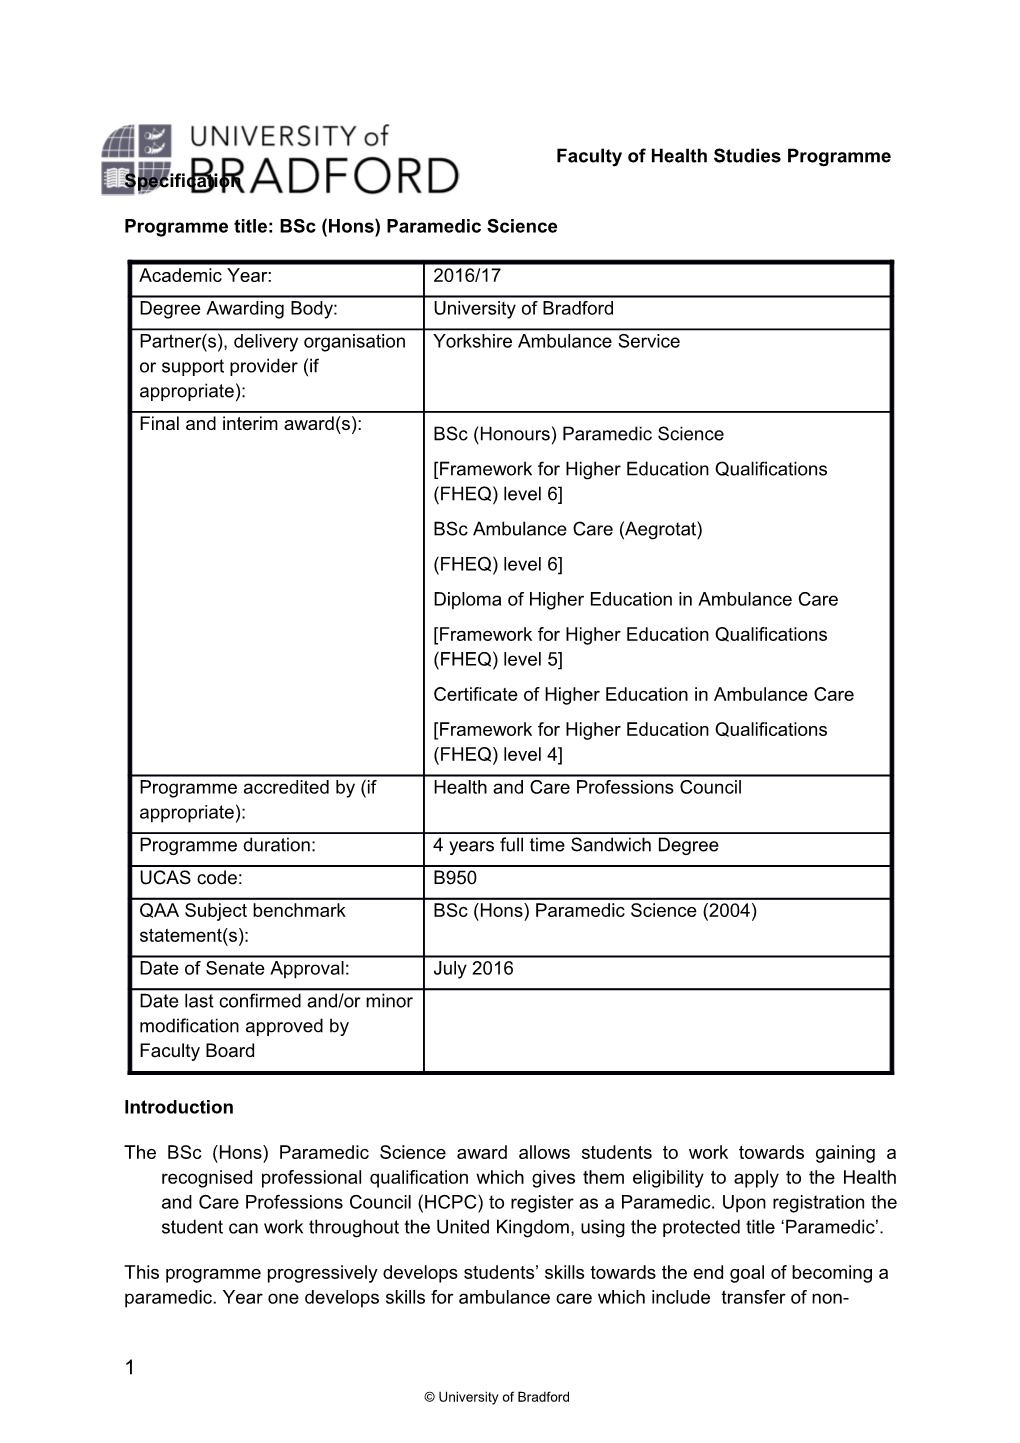 Faculty Ofhealth Studiesprogramme Specification